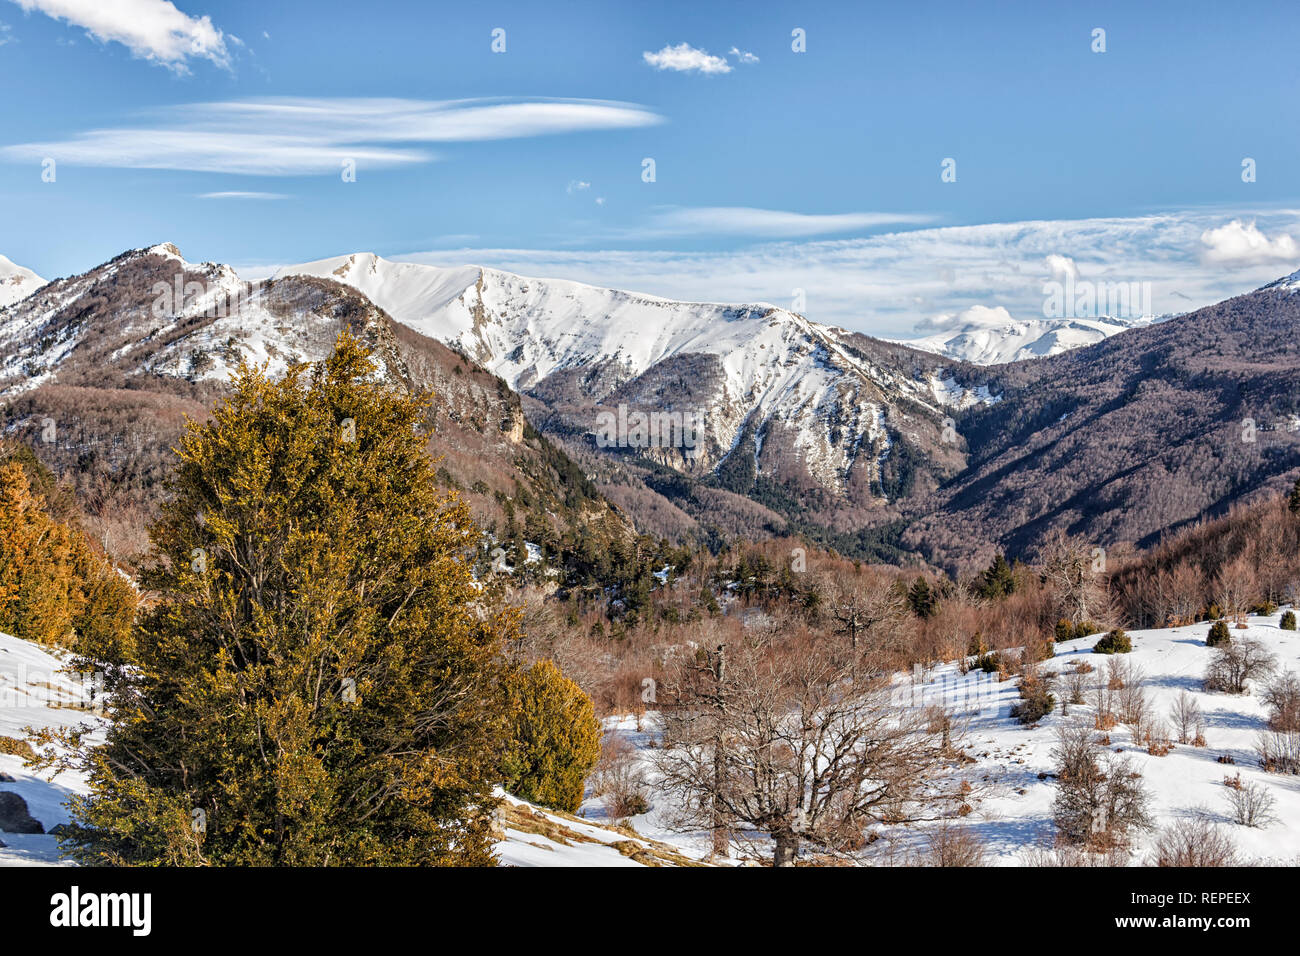 snowy landscape in the north of spain Stock Photo